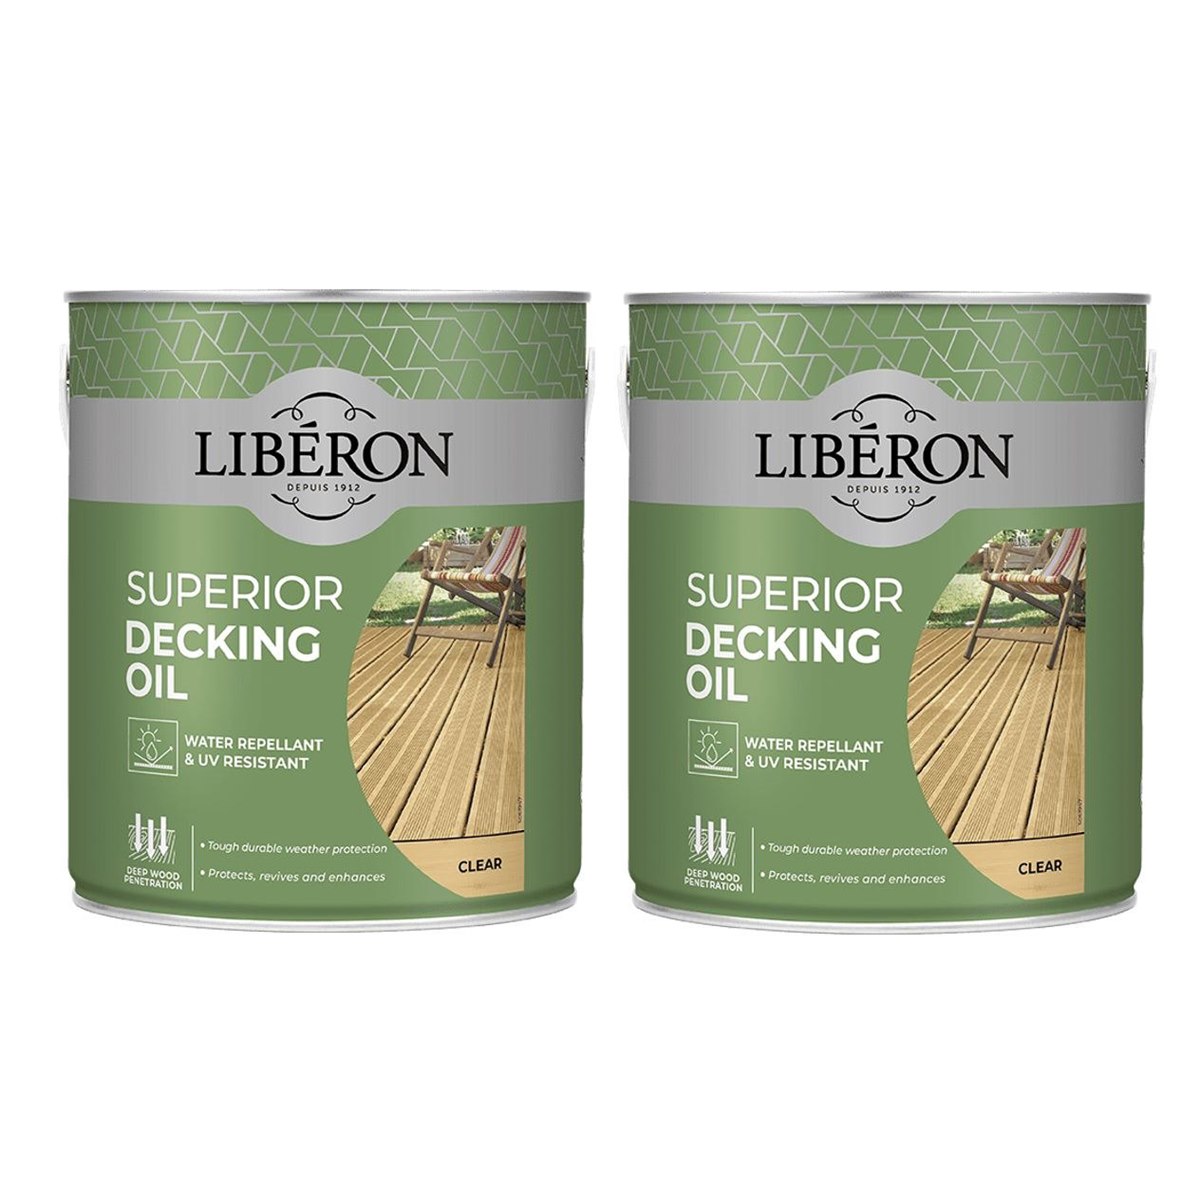 Case of 2 x Liberon Superior Decking Oil Clear 5 Litre